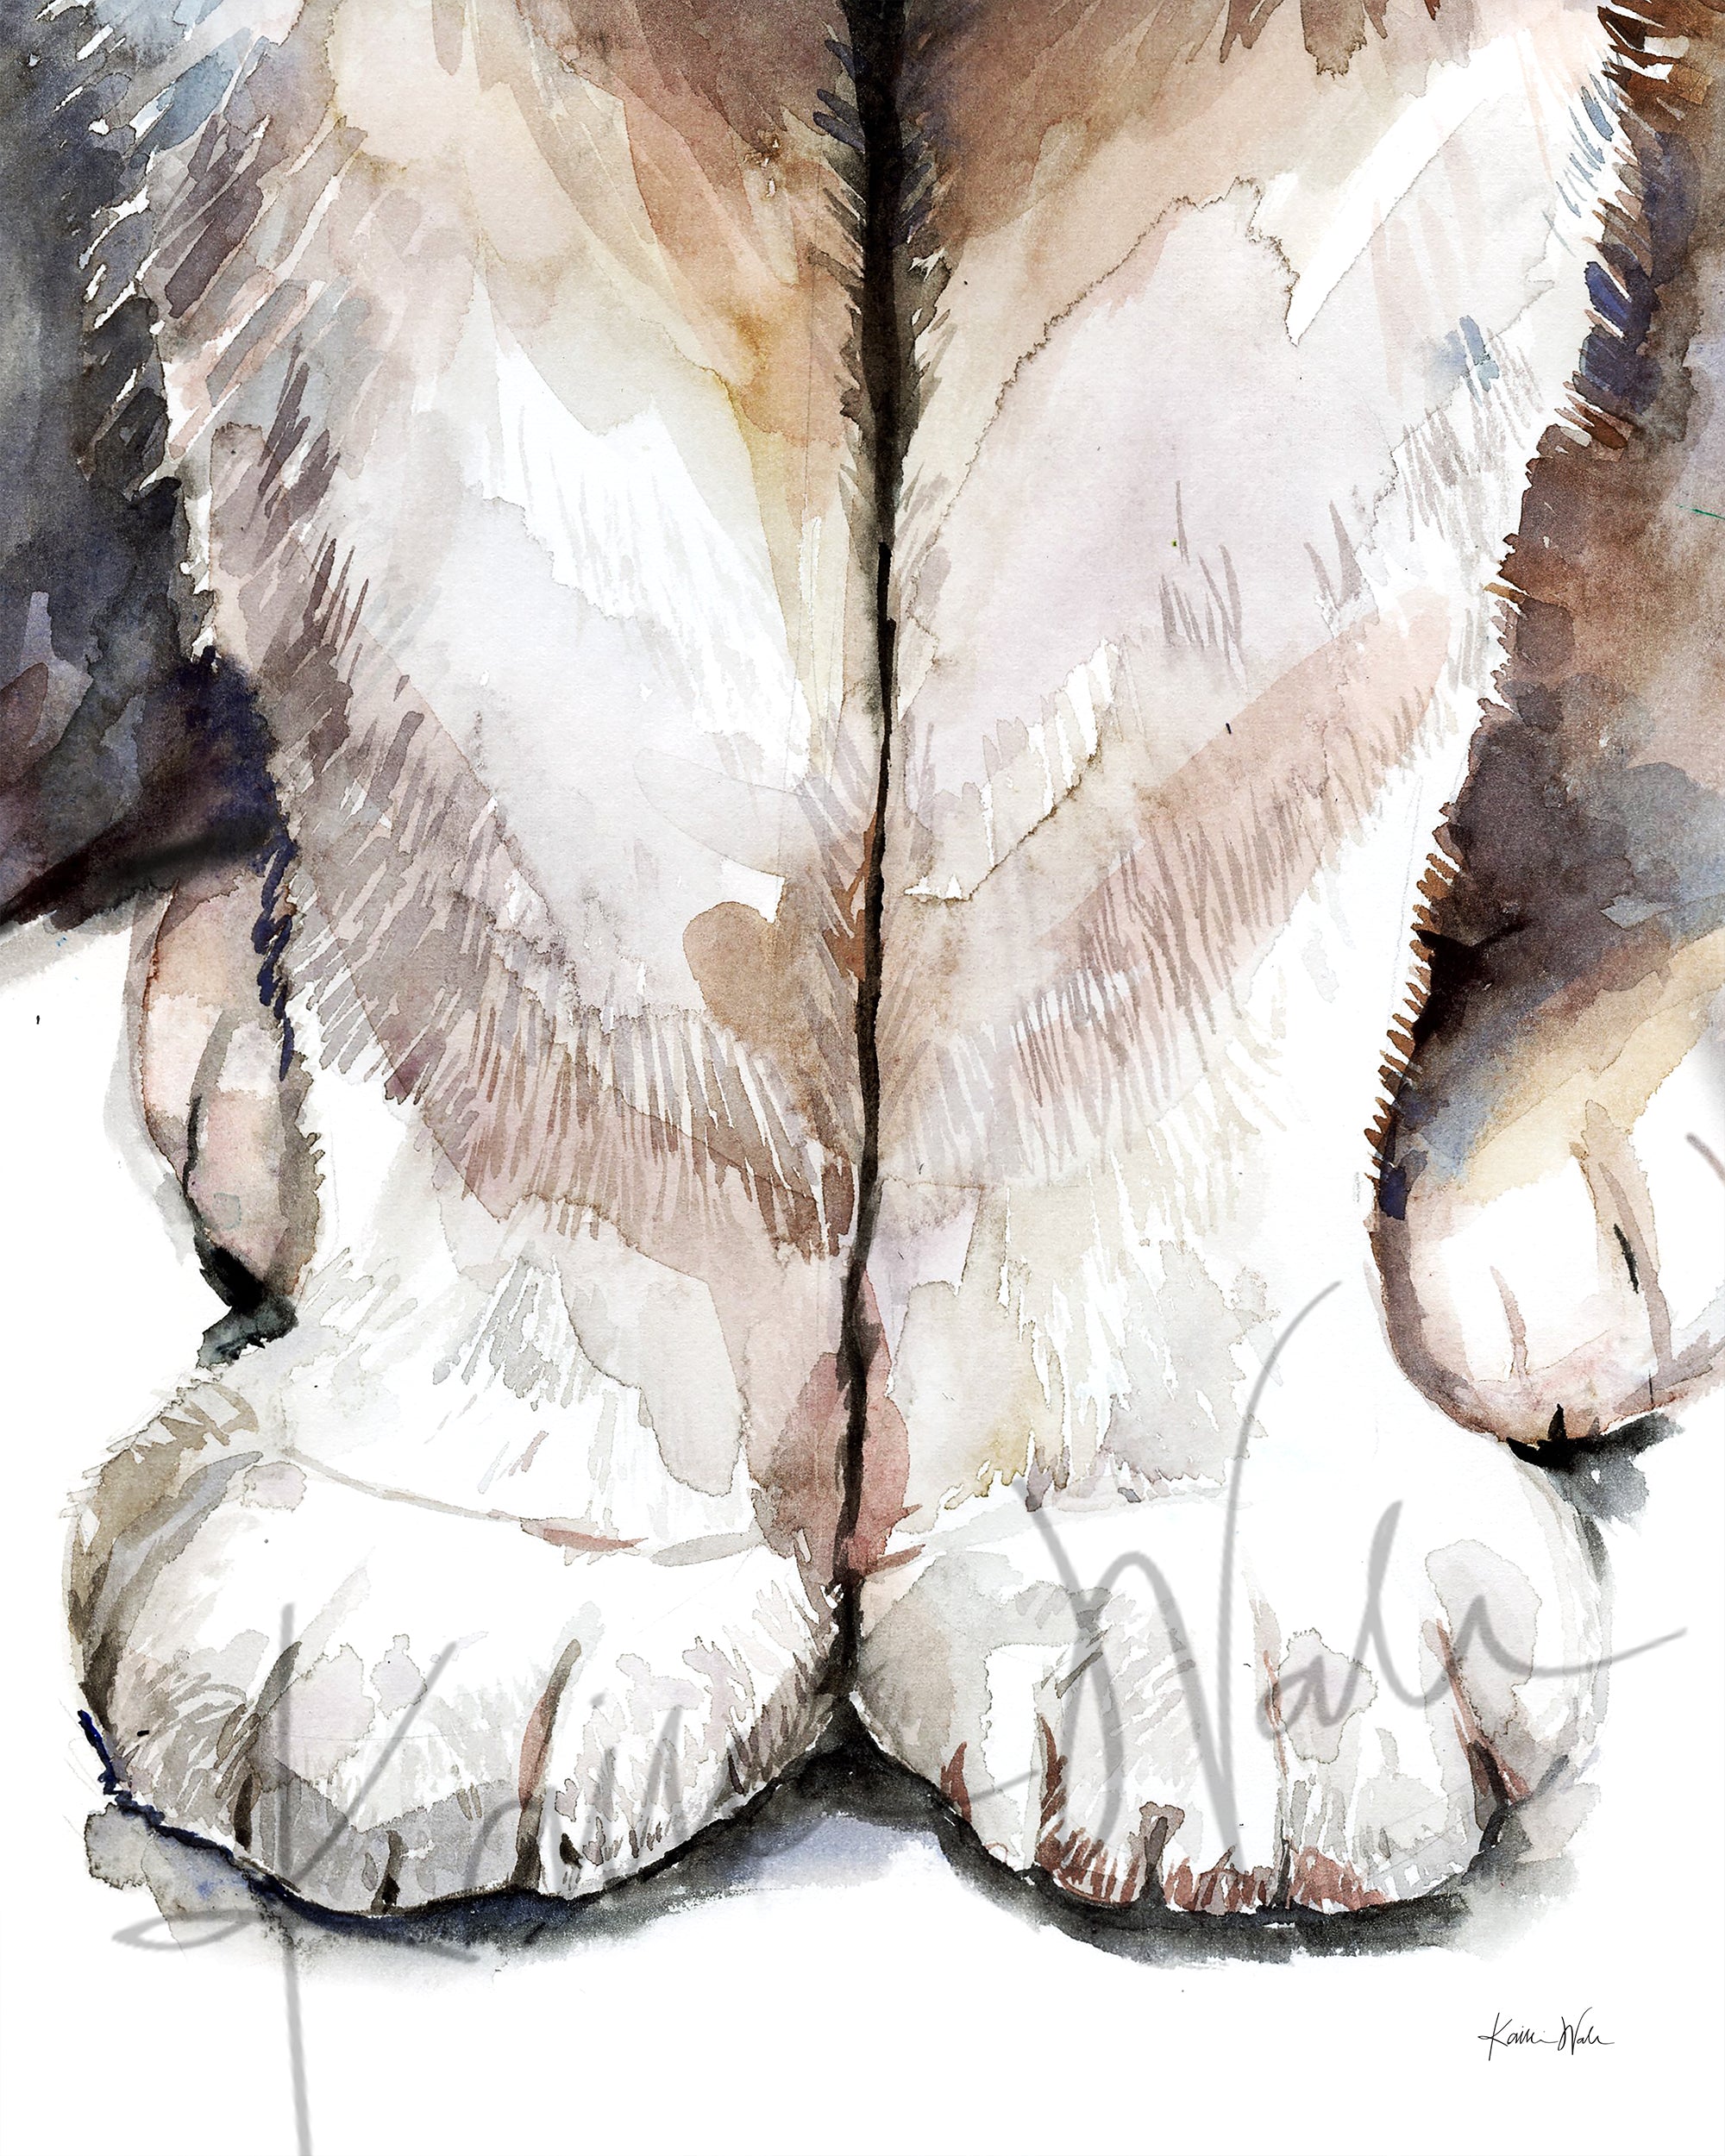 Unframed watercolor painting of a zoomed in perspective of a cat paws. The cat is gray, tan, and white.